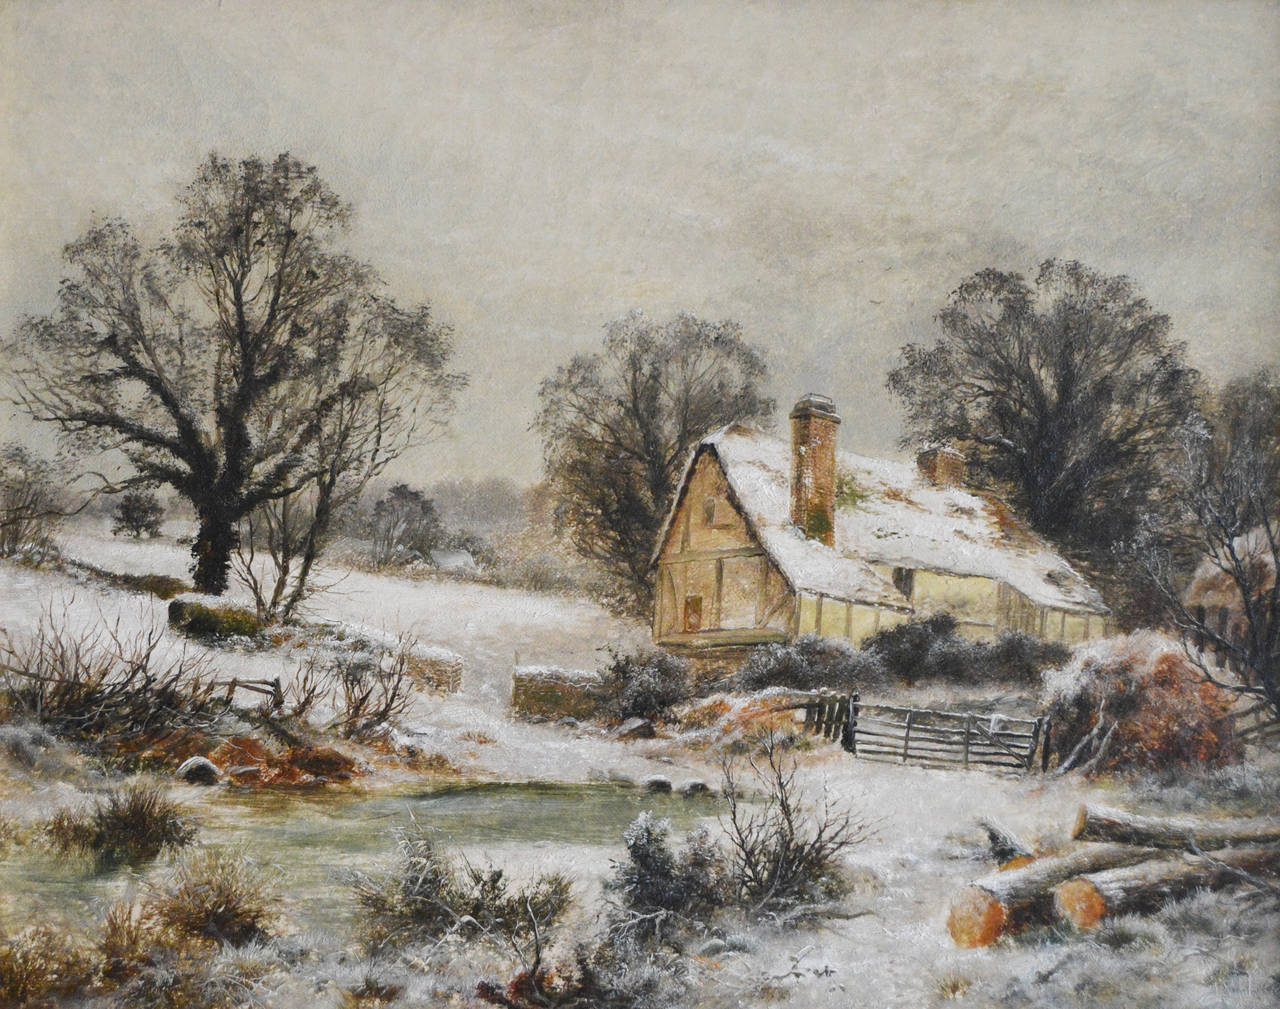 Edgar Longstaffe
British, (1852-1933)
Peter’s Cottage 
Oil on canvas, signed with monogram & dated 1894 
Image size: 12 inches x 15 inches 
Size including frame: 16¼ x 19¼ inches

Edgar Longstaffe was a landscape artist born near Derby in